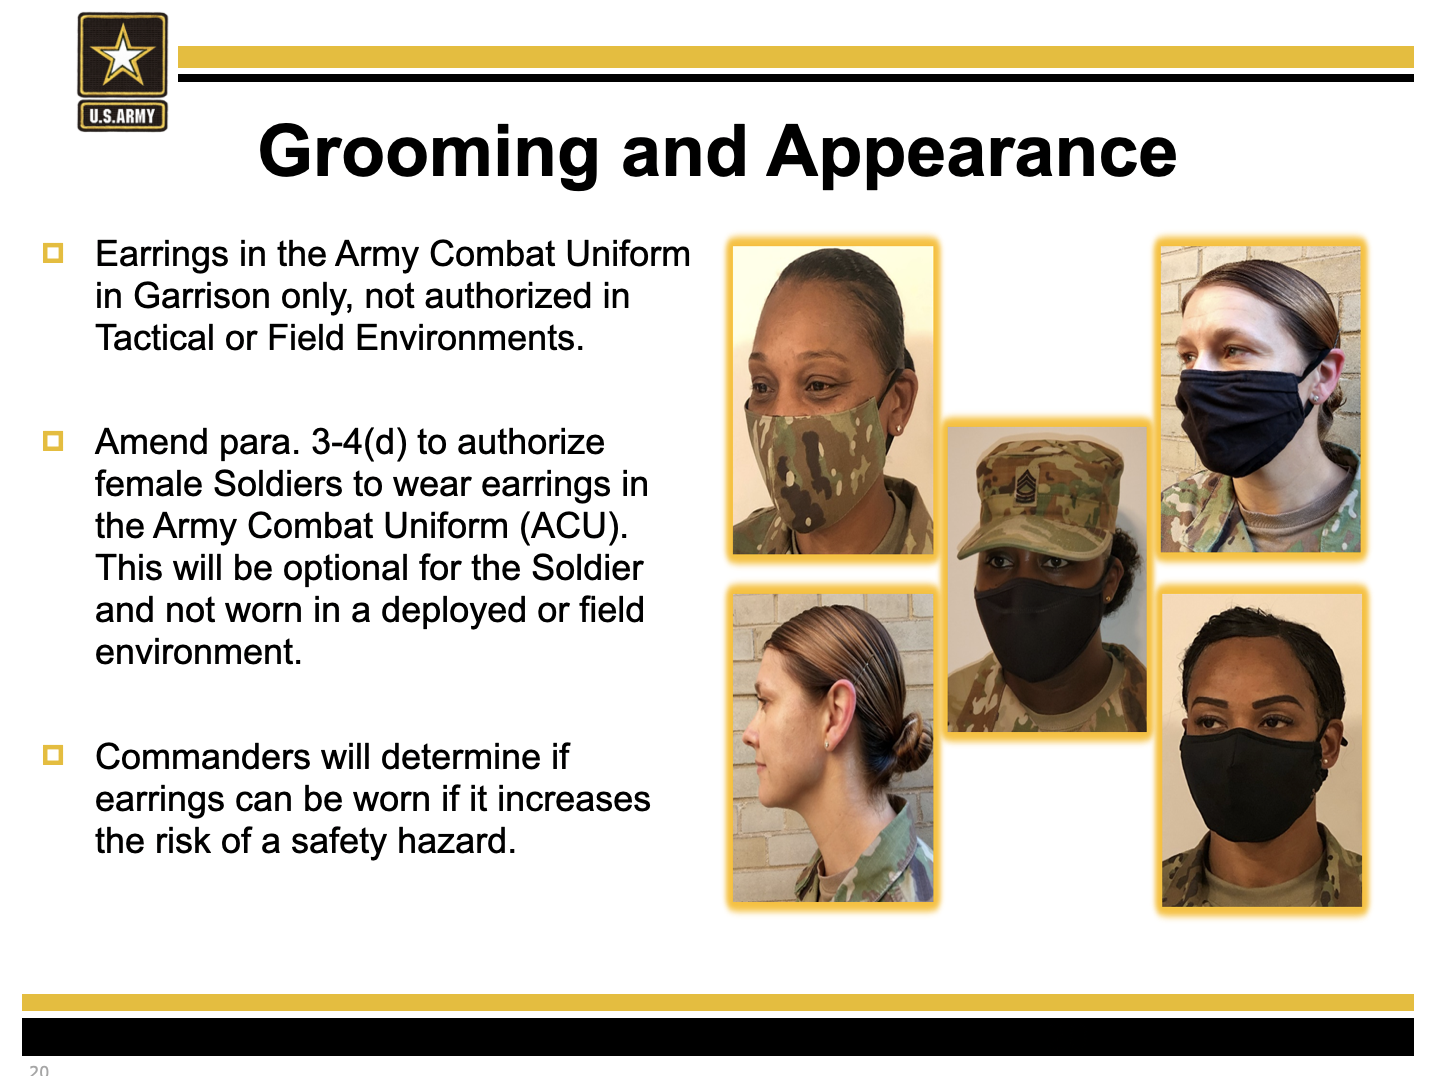 Army Regulation 670-1: Nail Color and Grooming Standards for Deployed Soldiers - wide 8